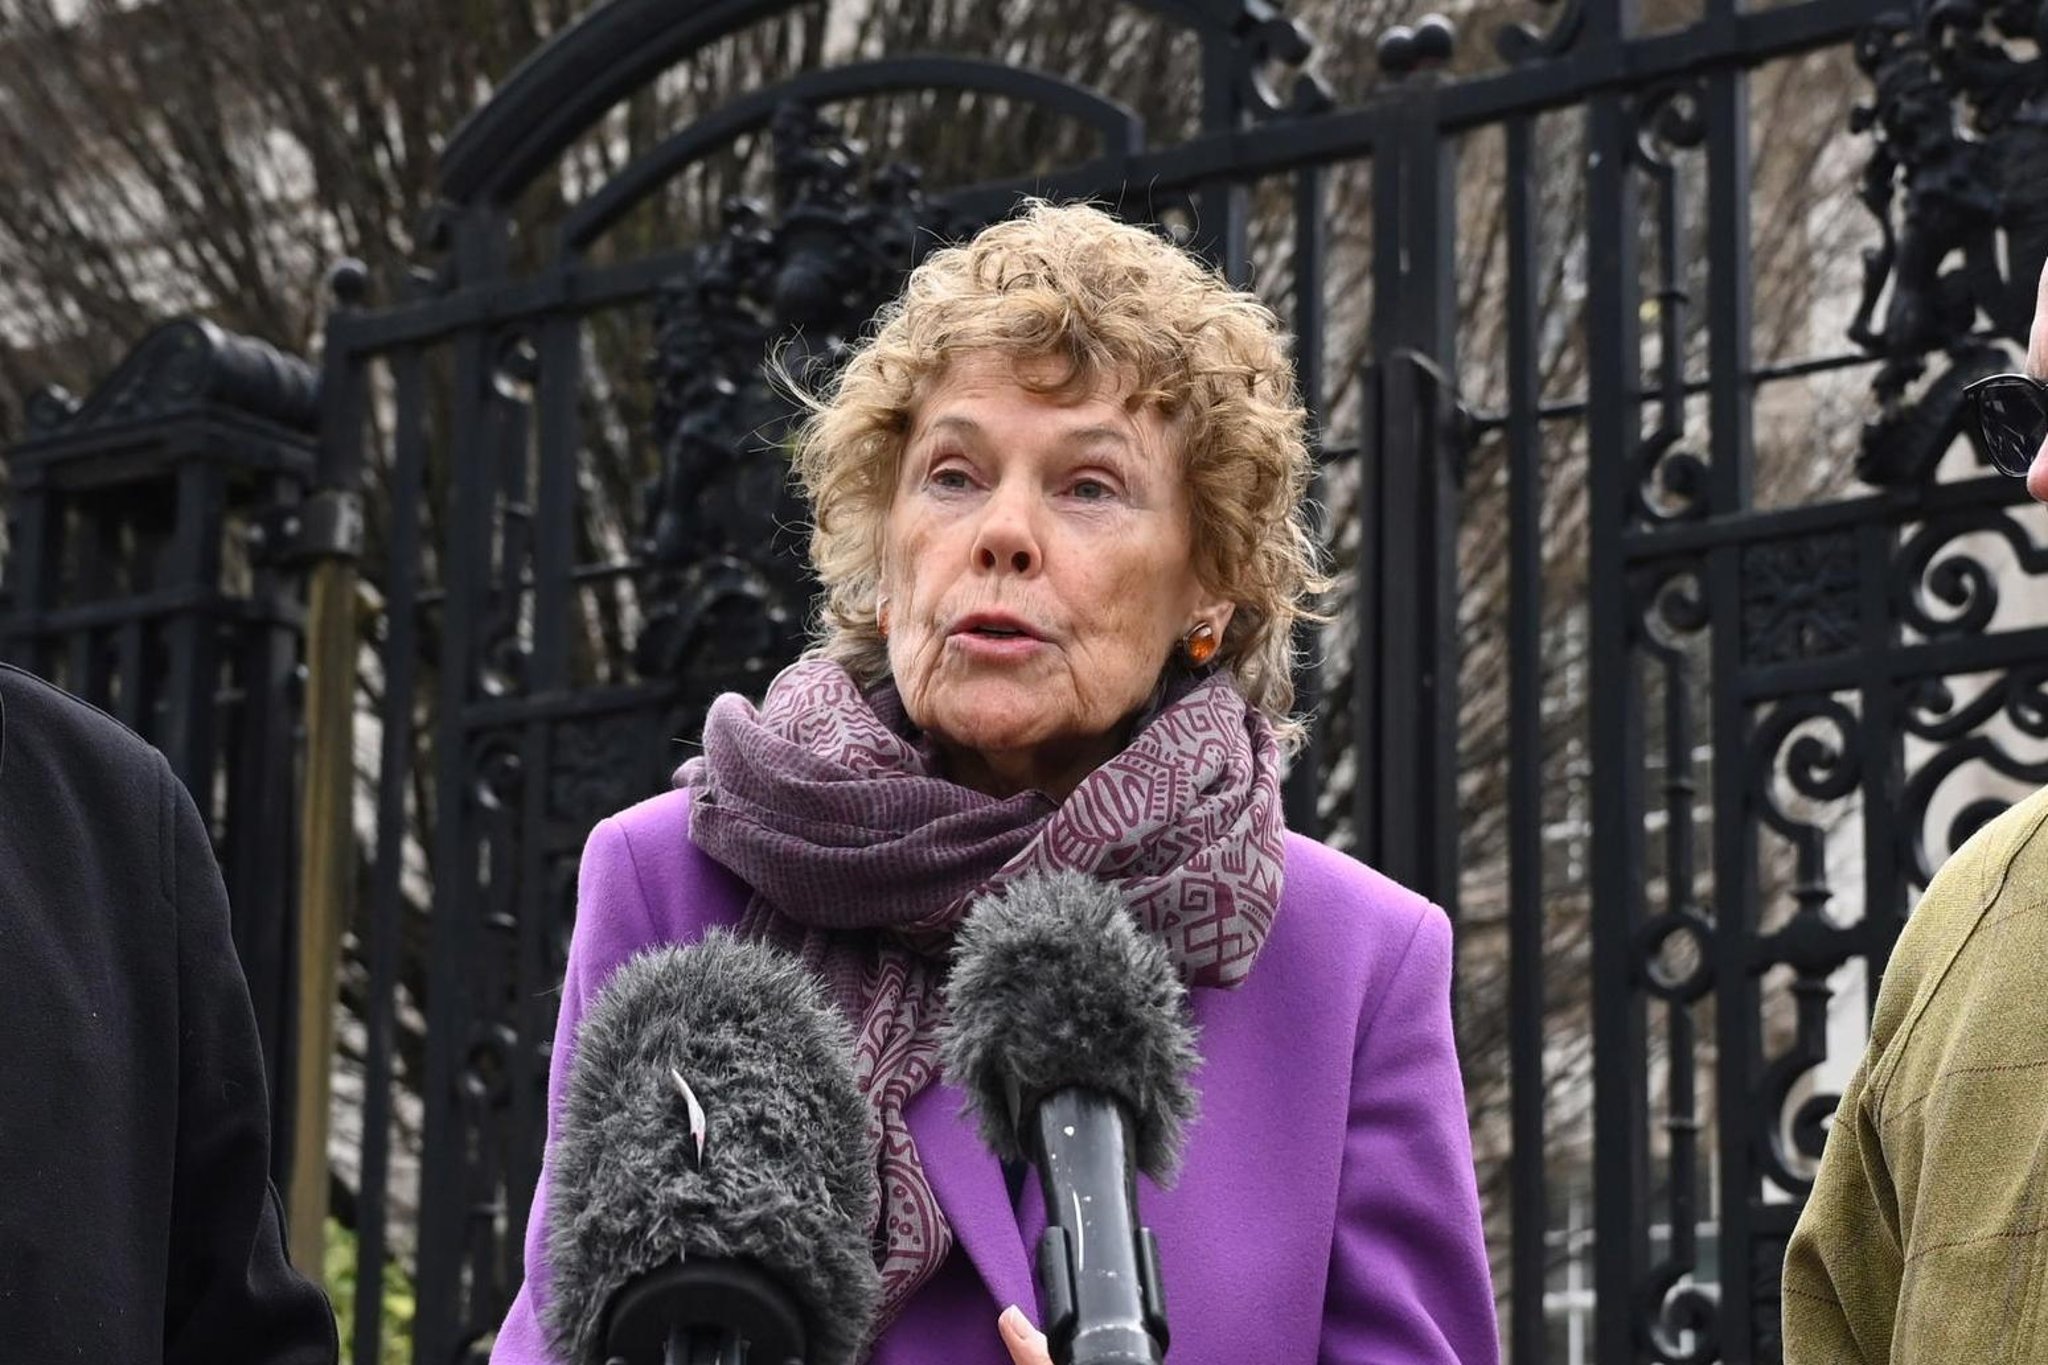 Kate Hoey: The Belfast Agreement, with its fatal deception, is finished